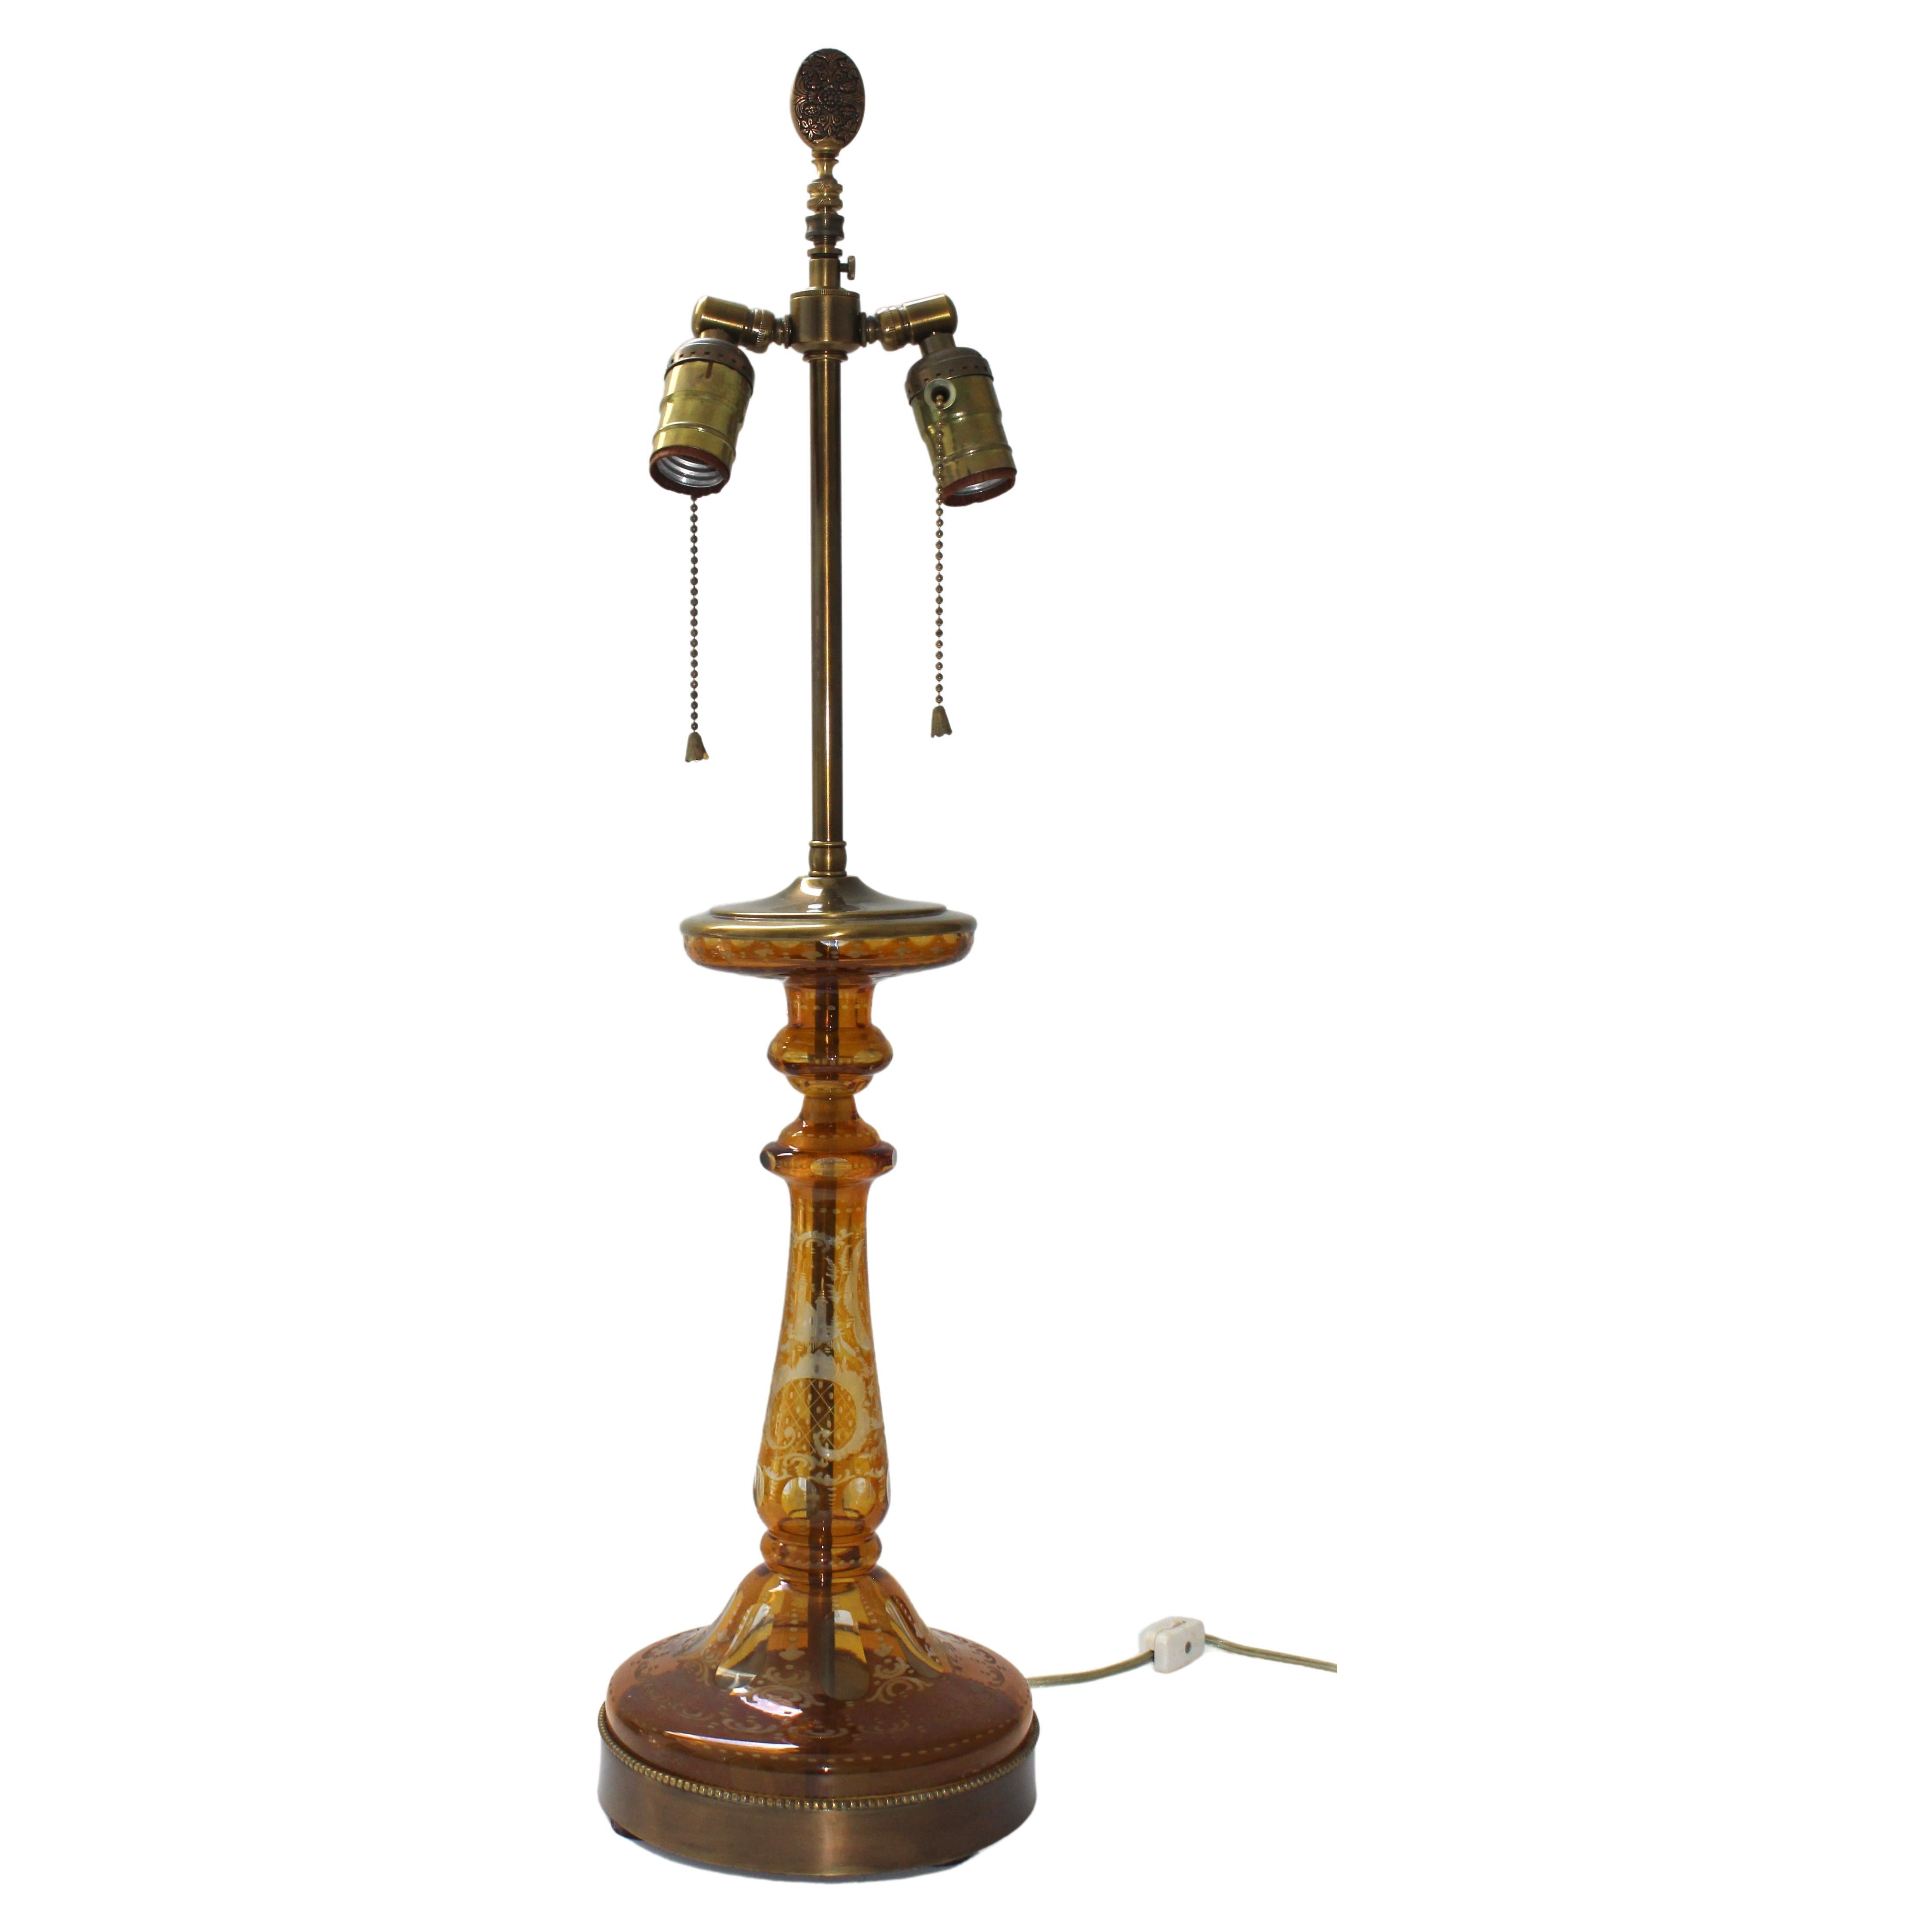 This stylsh Bohemian glass lamp started its life as a candlestick and at some point in time was converted to a table lamp. The piece is hand eteched with Baroque inspired cartouches, a castle and a leaping deer. And the antique brass hardware